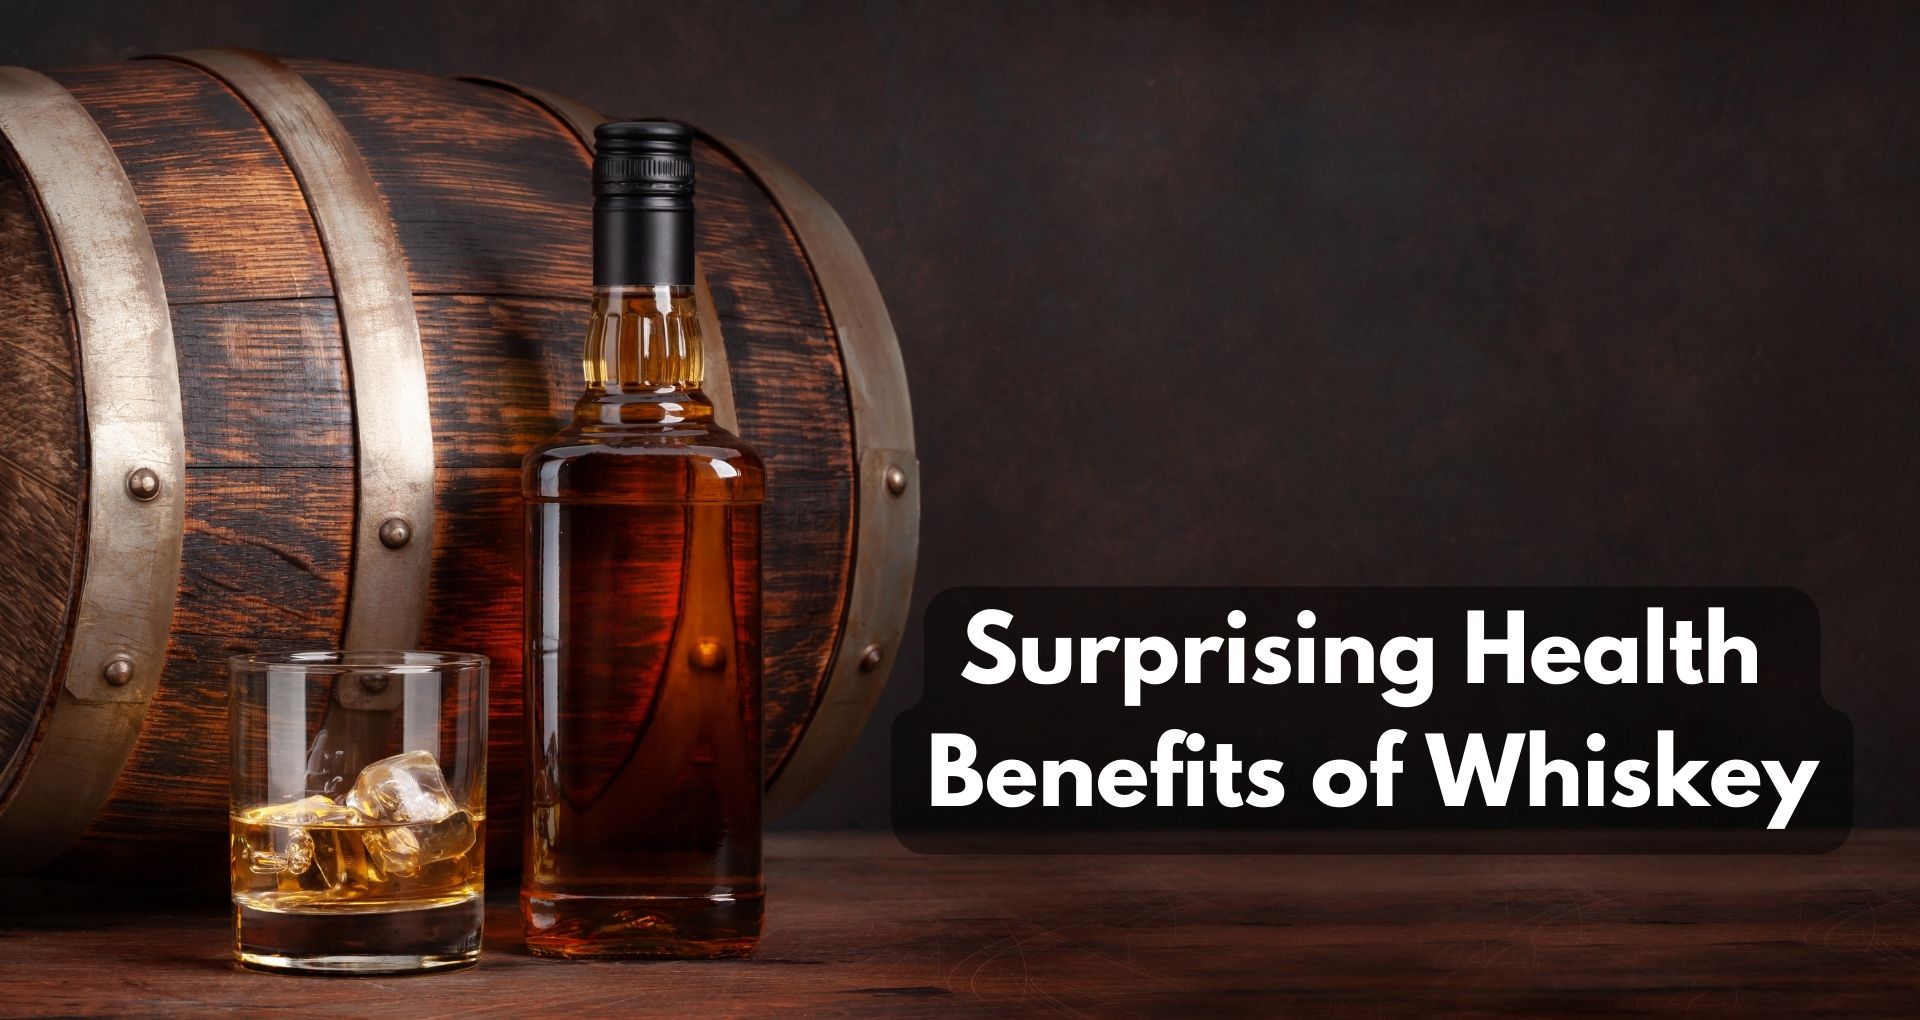 The Surprising Health Benefits of Whiskey